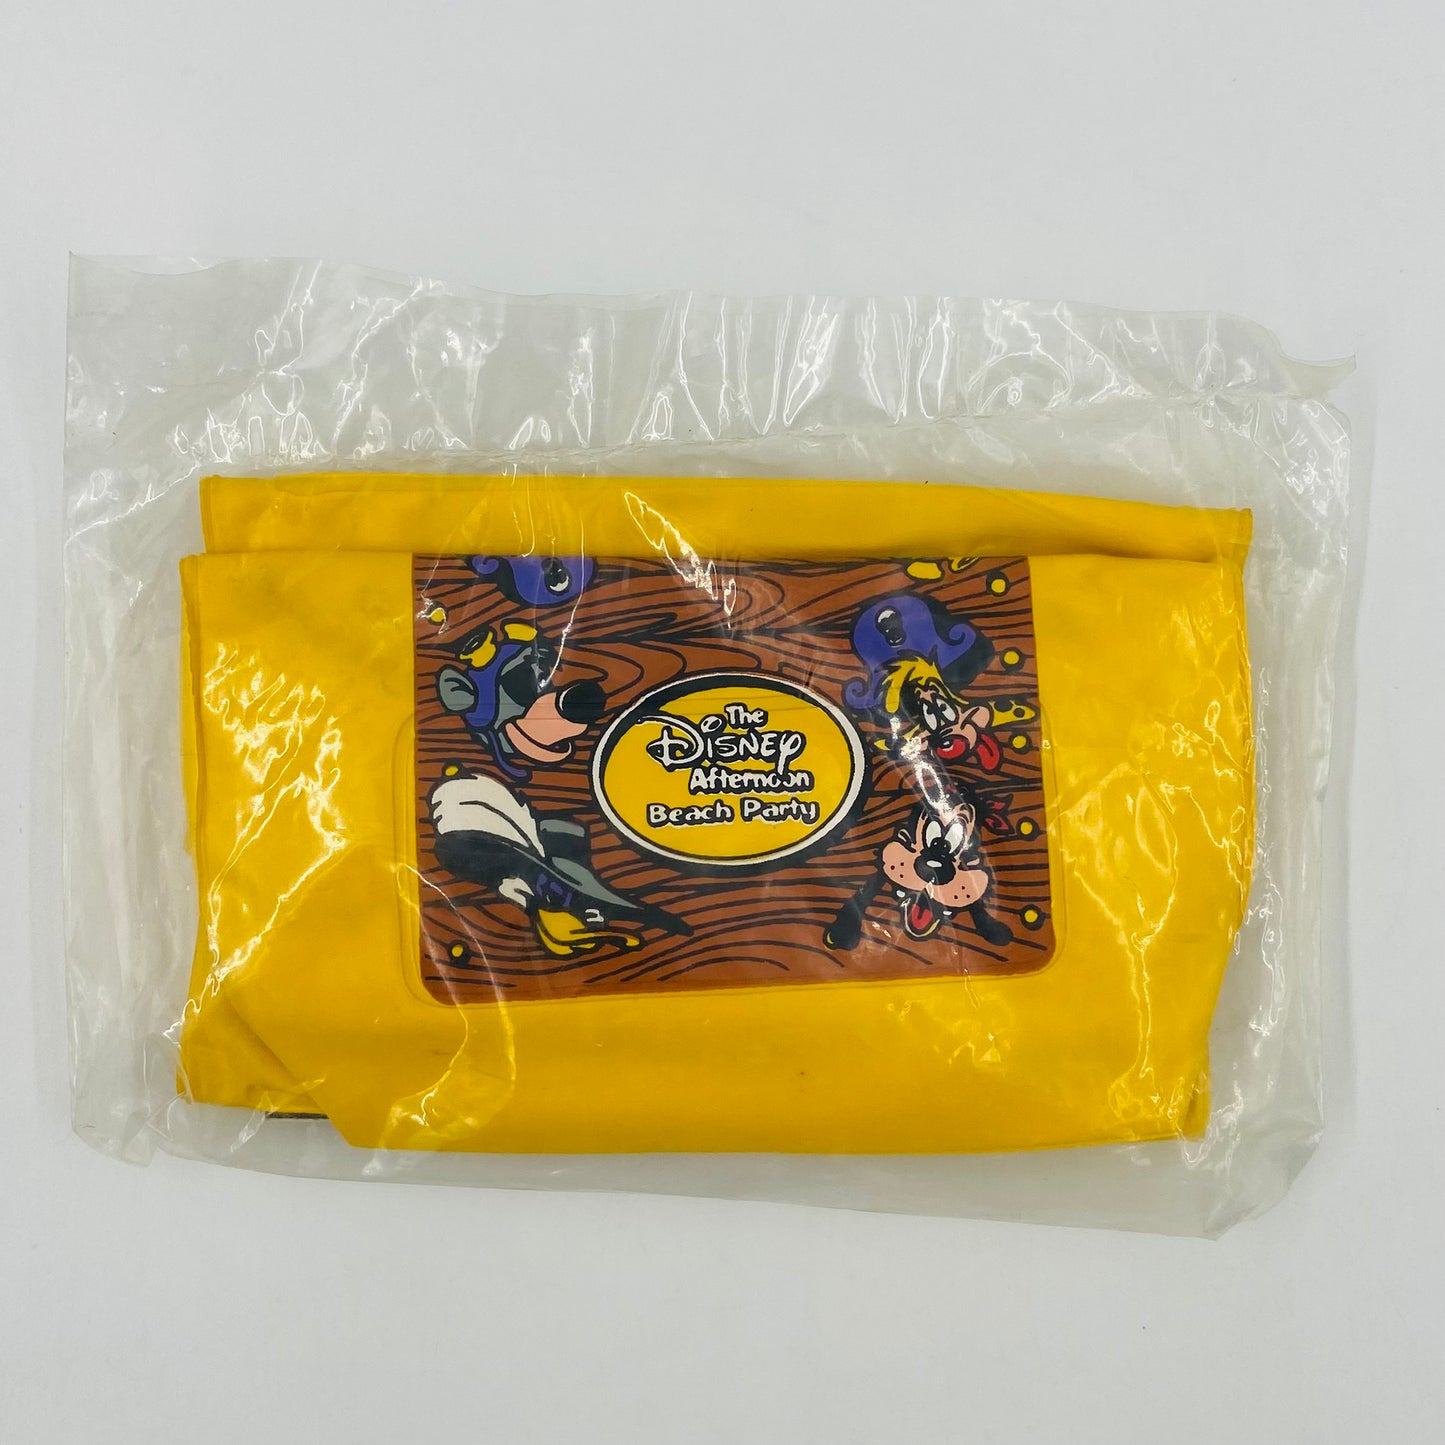 Disney Afternoon blow up treasure chest Burger King Kids' Meal toy (1994) bagged